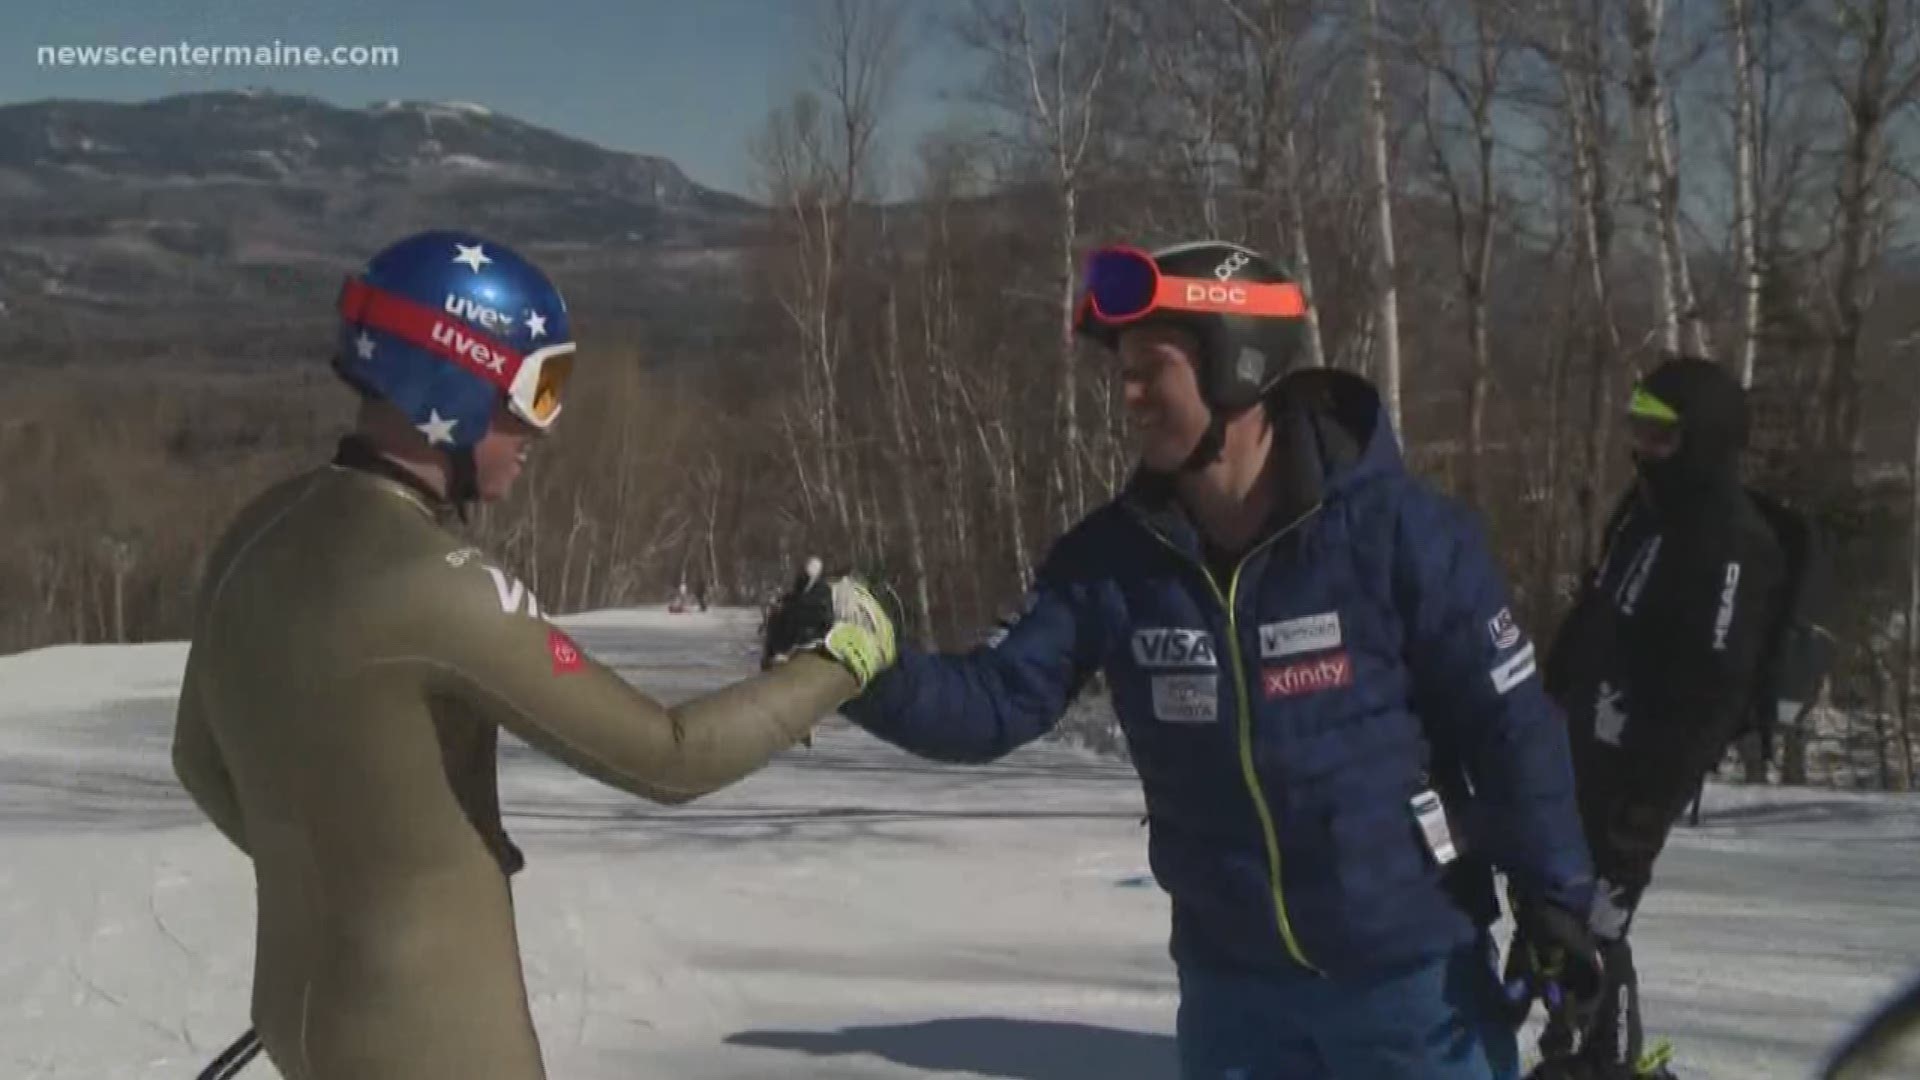 The U.S. National Ski Championships are underway at Sugarloaf Mountain.